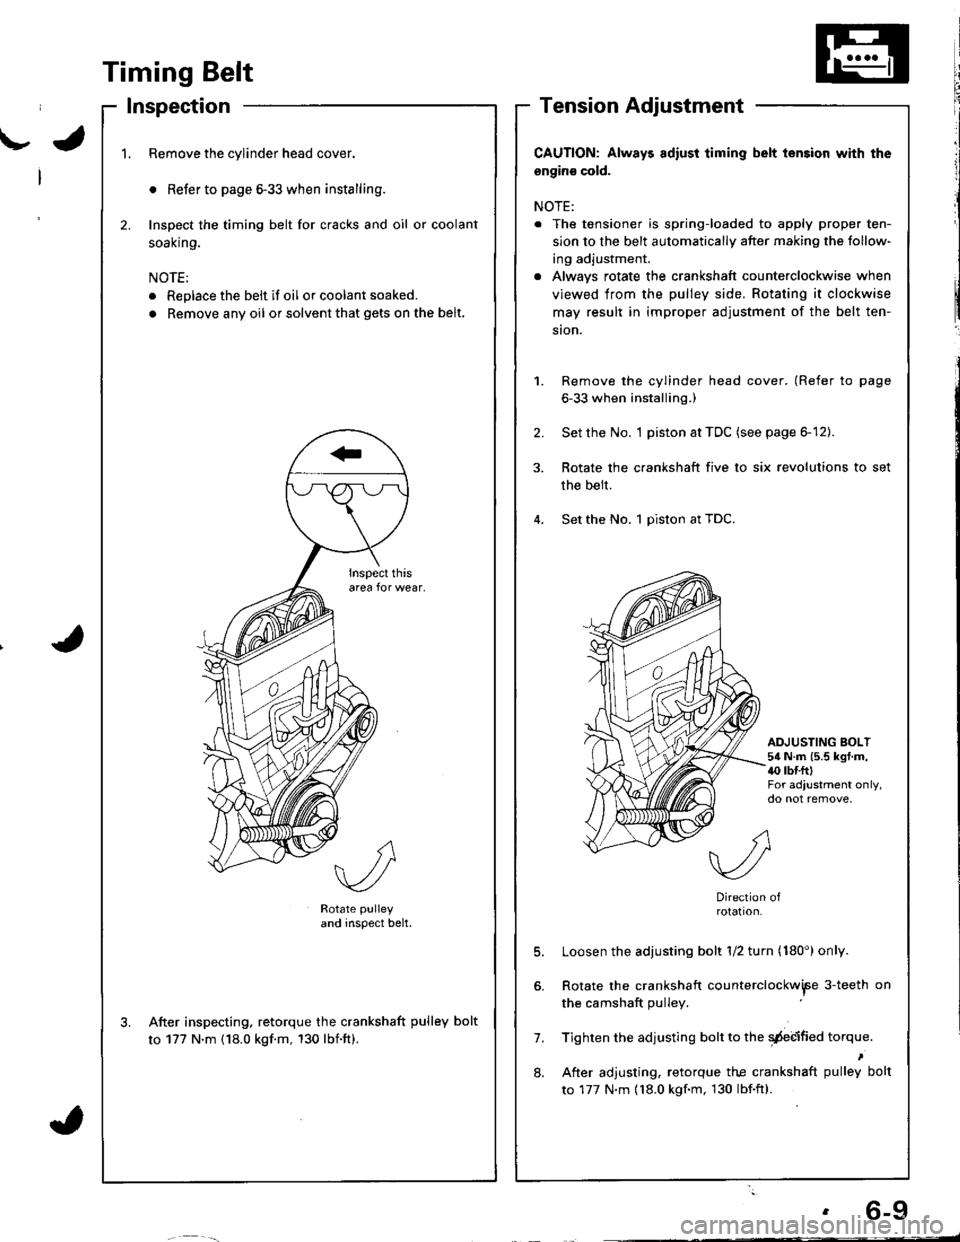 ACURA INTEGRA 1998  Service Repair Manual \-a
I
I
{
. 6-9
Timing Belt
Inspection
1.Remove the cylinder head cover.
o Refer to page 6-33 when installing.
Inspect the timing belt for cracks and oil or coolant
soal(n9.
NOTE:
. Replace the belt i